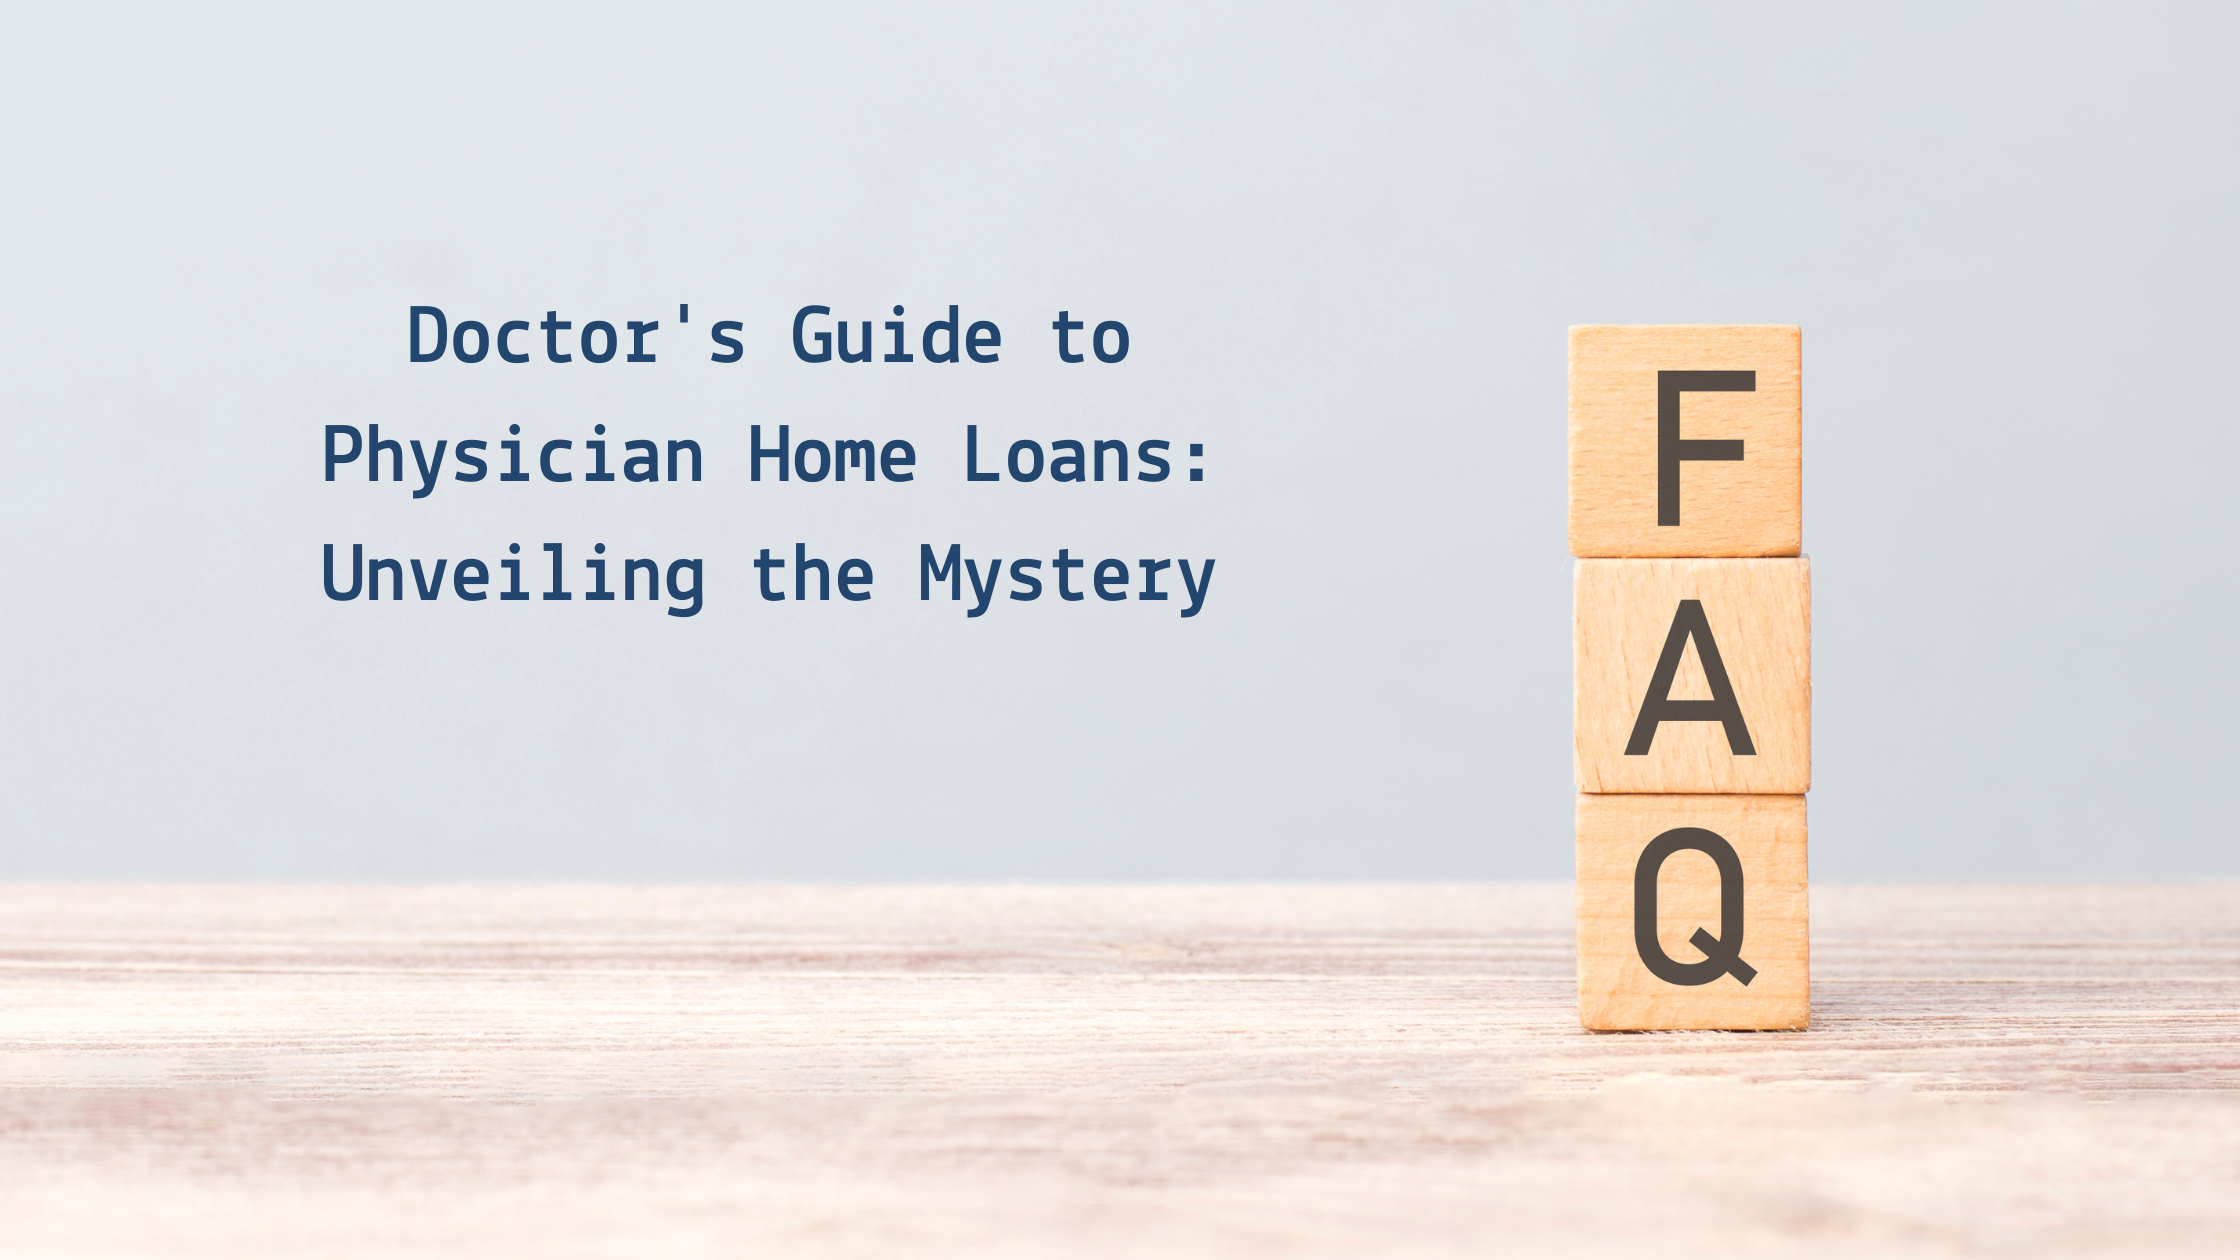 Doctors Guide to Physician Home Loans